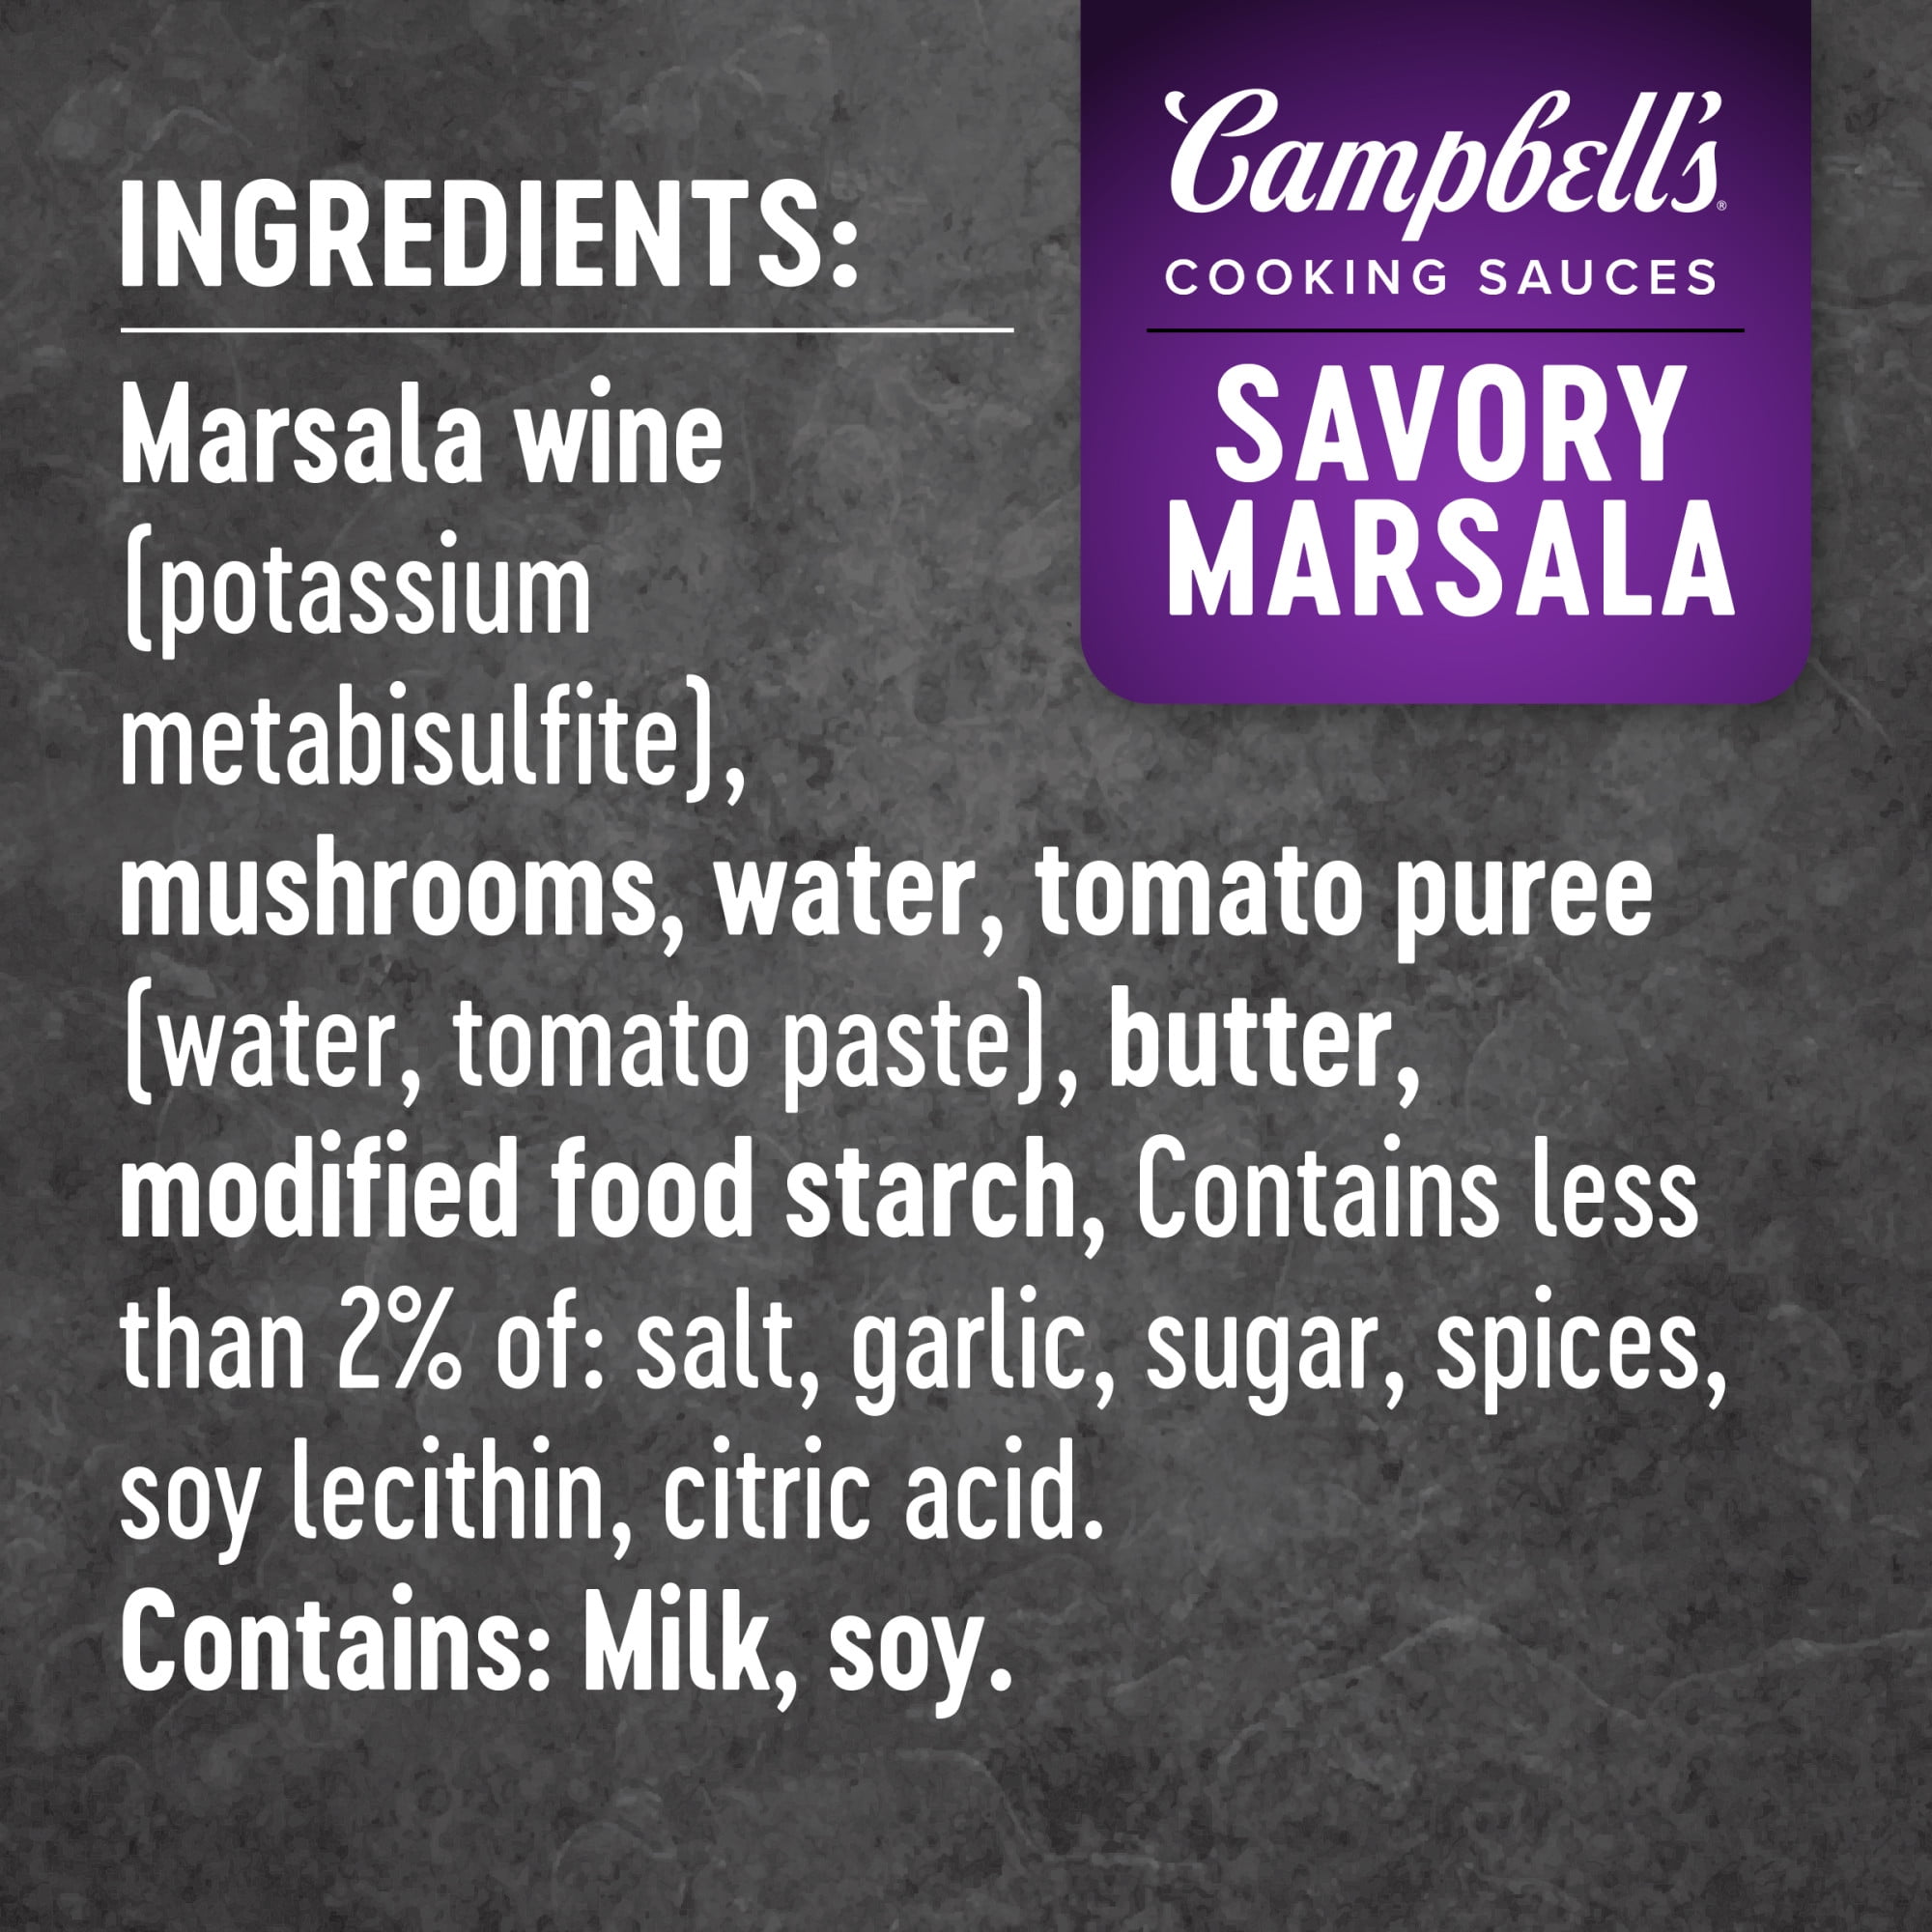 Campbell's® Cooking Sauces Savory Marsala Sauce, 11 oz - Mariano's